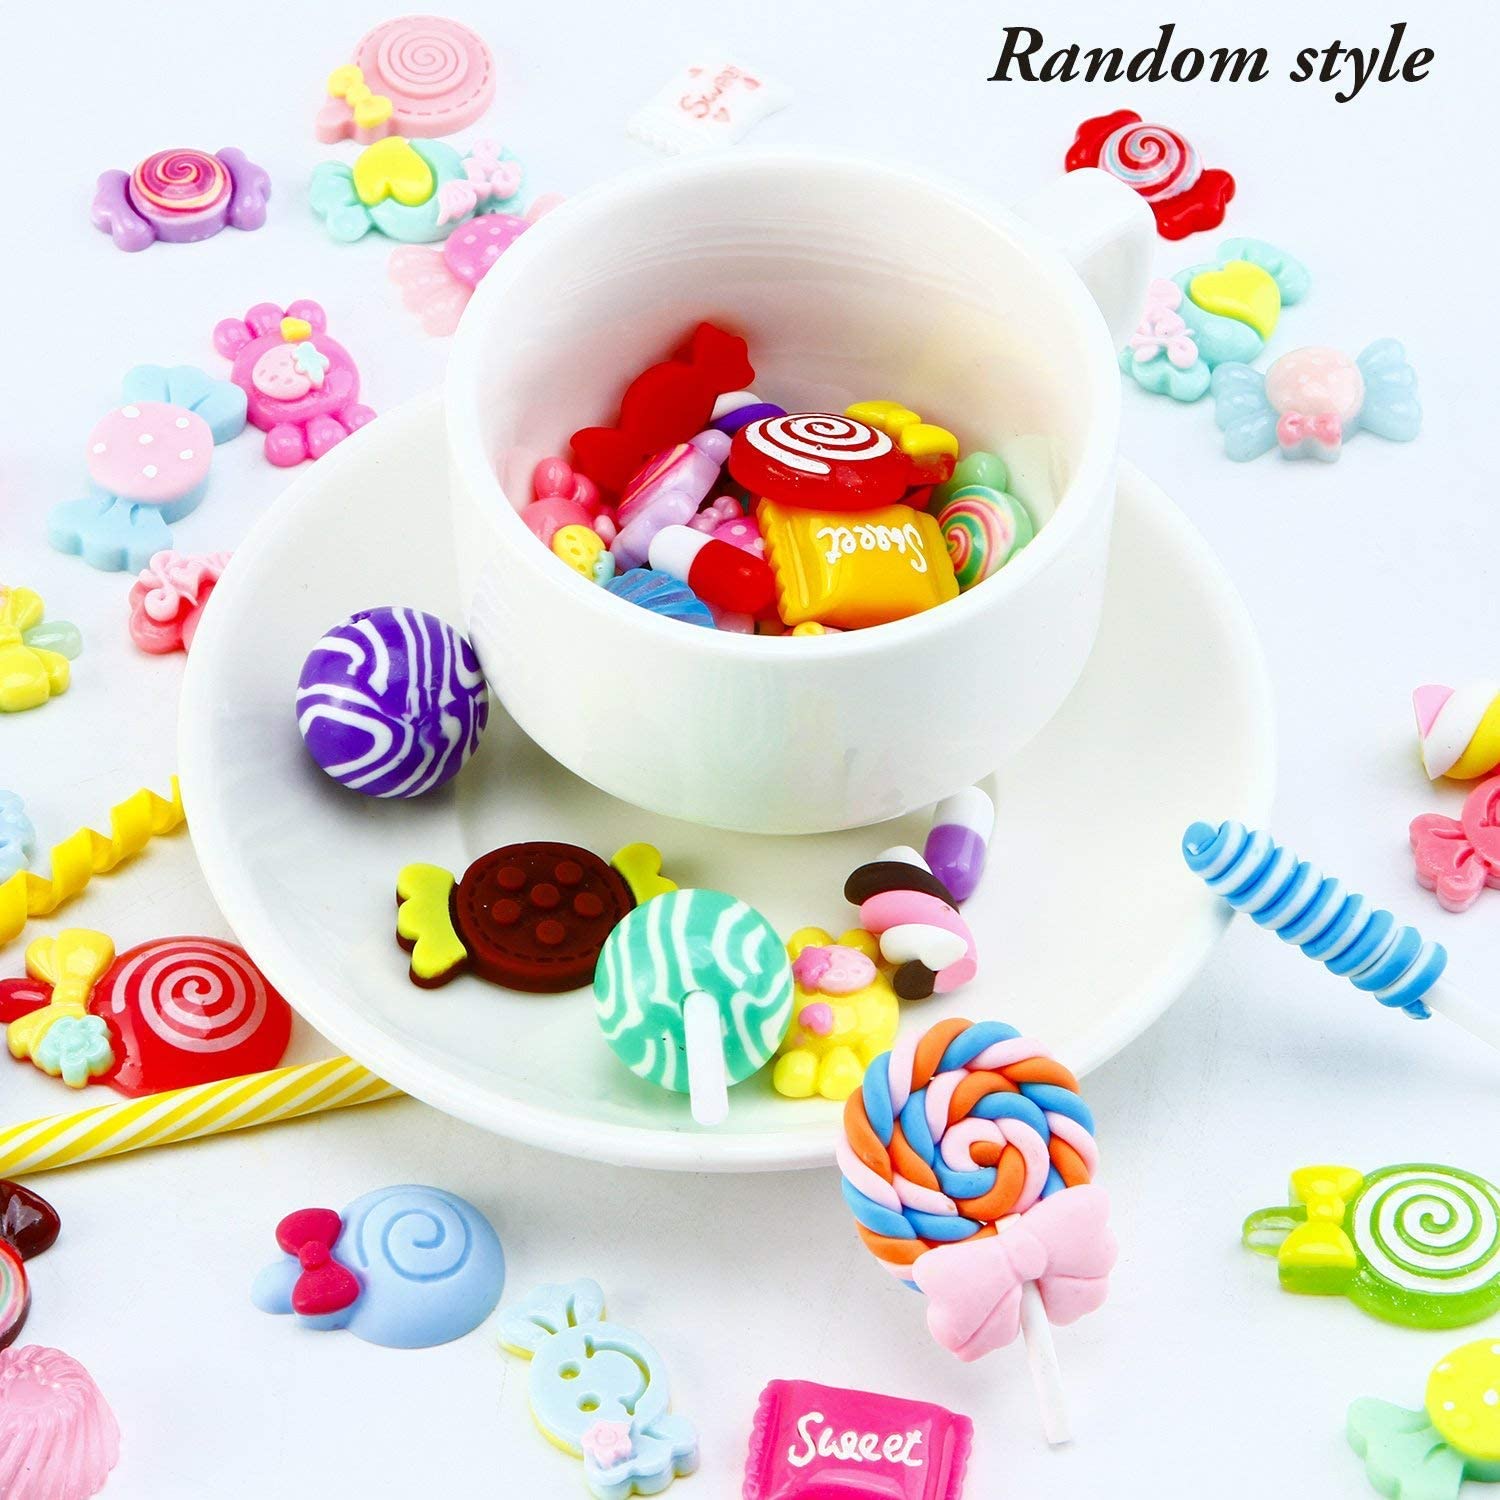 VONTER 60 Pieces Slime Charms Set Candy Sweets Charms Mixed Flatback Resin Charms for Slime DIY Crafts Accessories Scrapbooking Slime Charms Mixed Resin Flatback Slime Beads Making Supplies - image 3 of 8